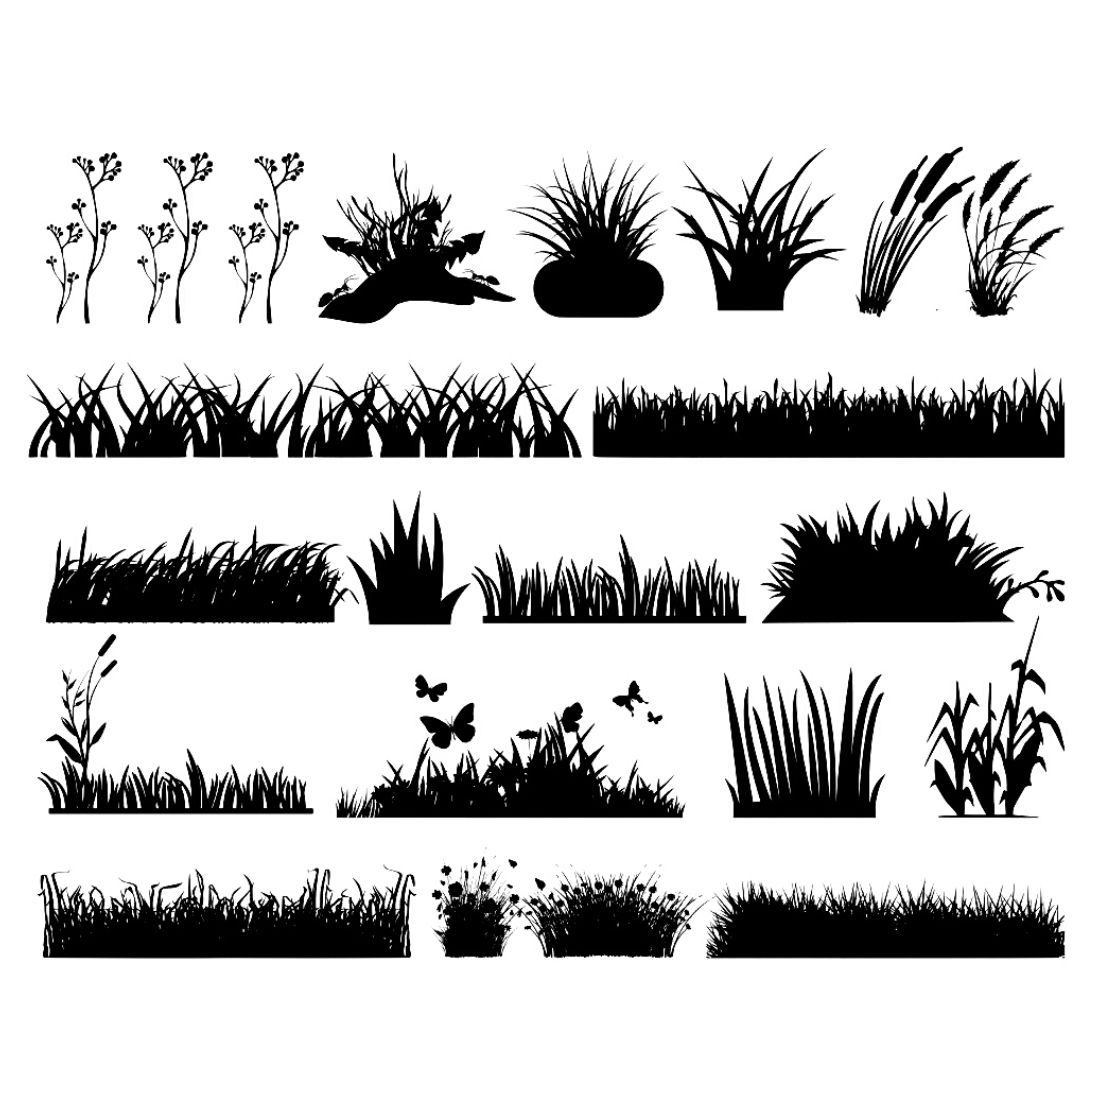 Grass Silhouette Bundles cover image.